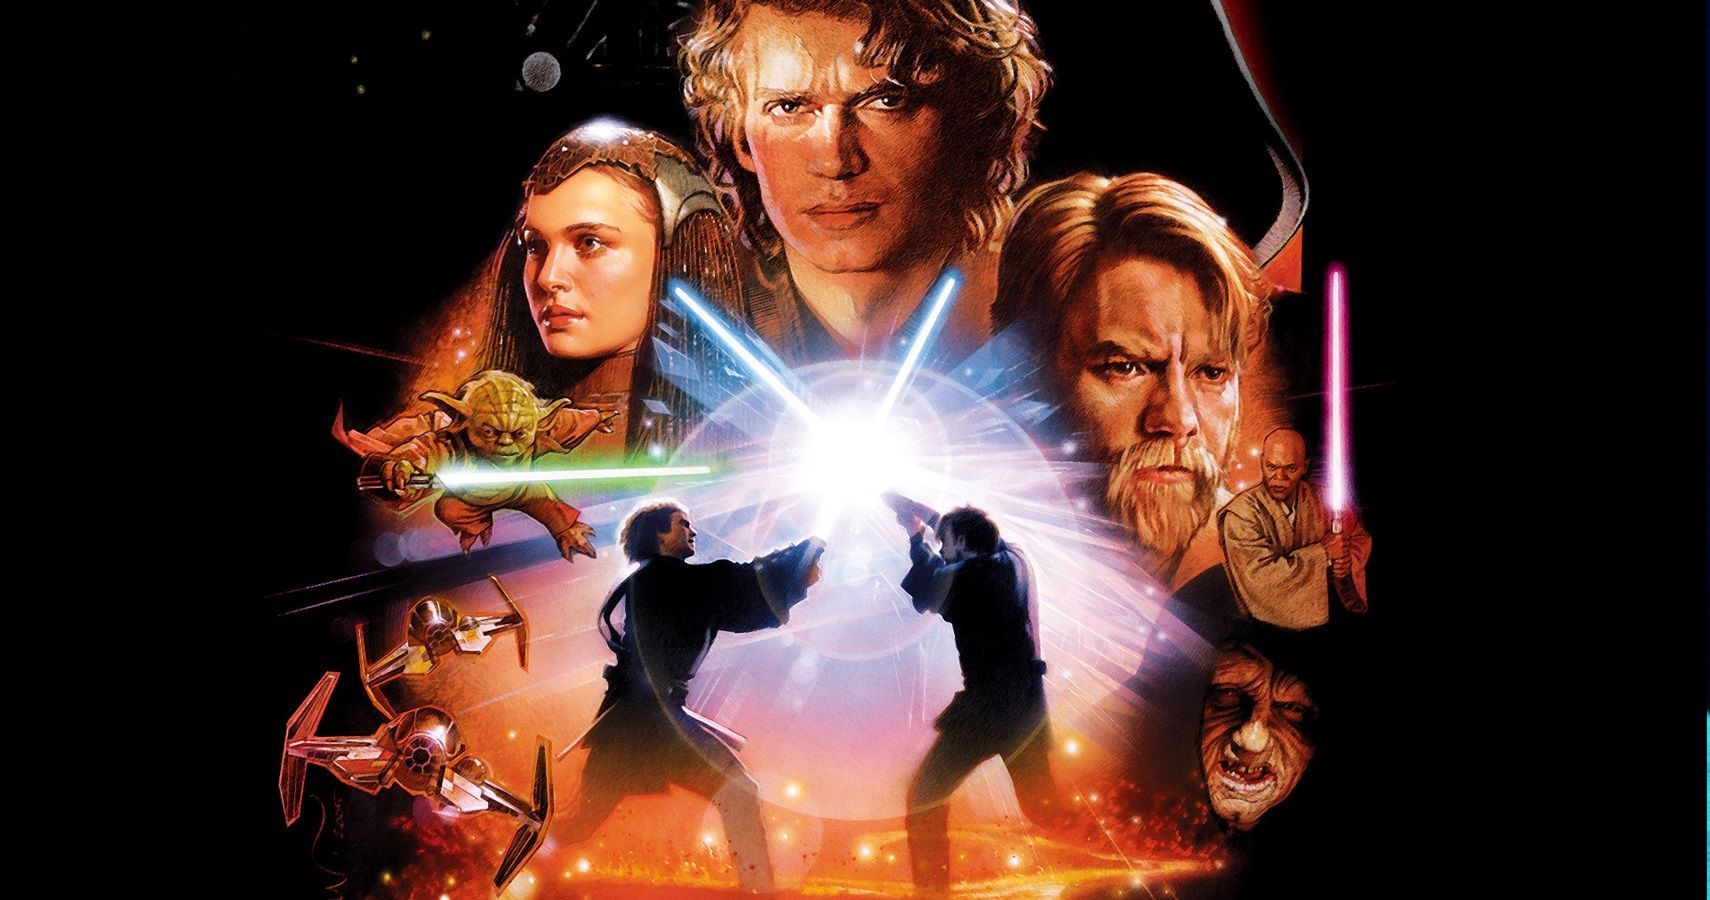 Star Wars 5 Things Revenge Of The Sith Got Right (& 5 It Got Wrong)